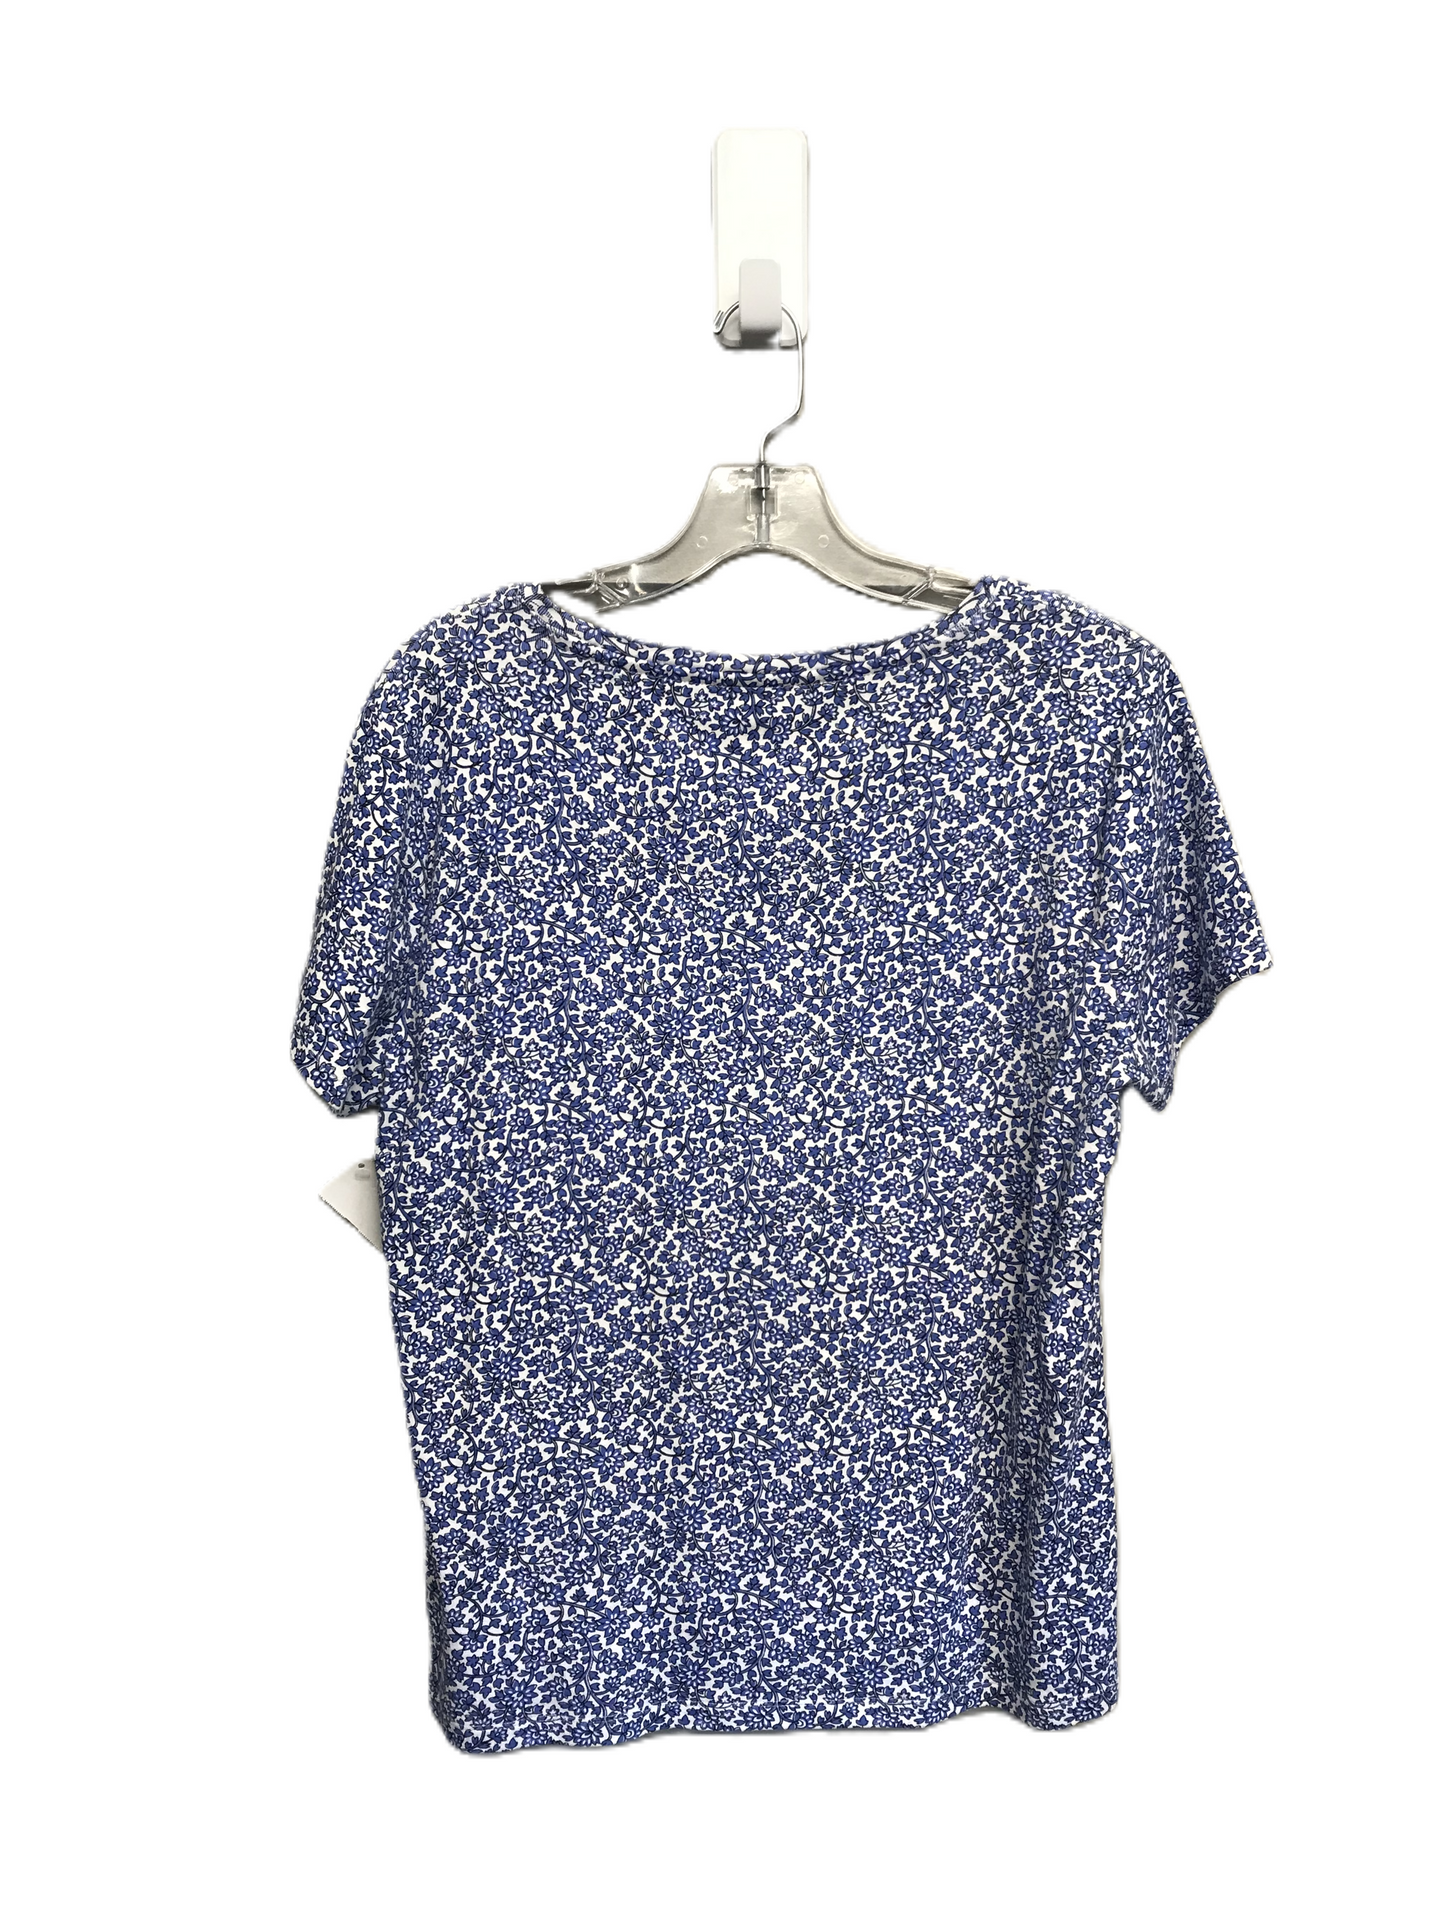 Floral Print Top Short Sleeve By Tommy Hilfiger, Size: Xl